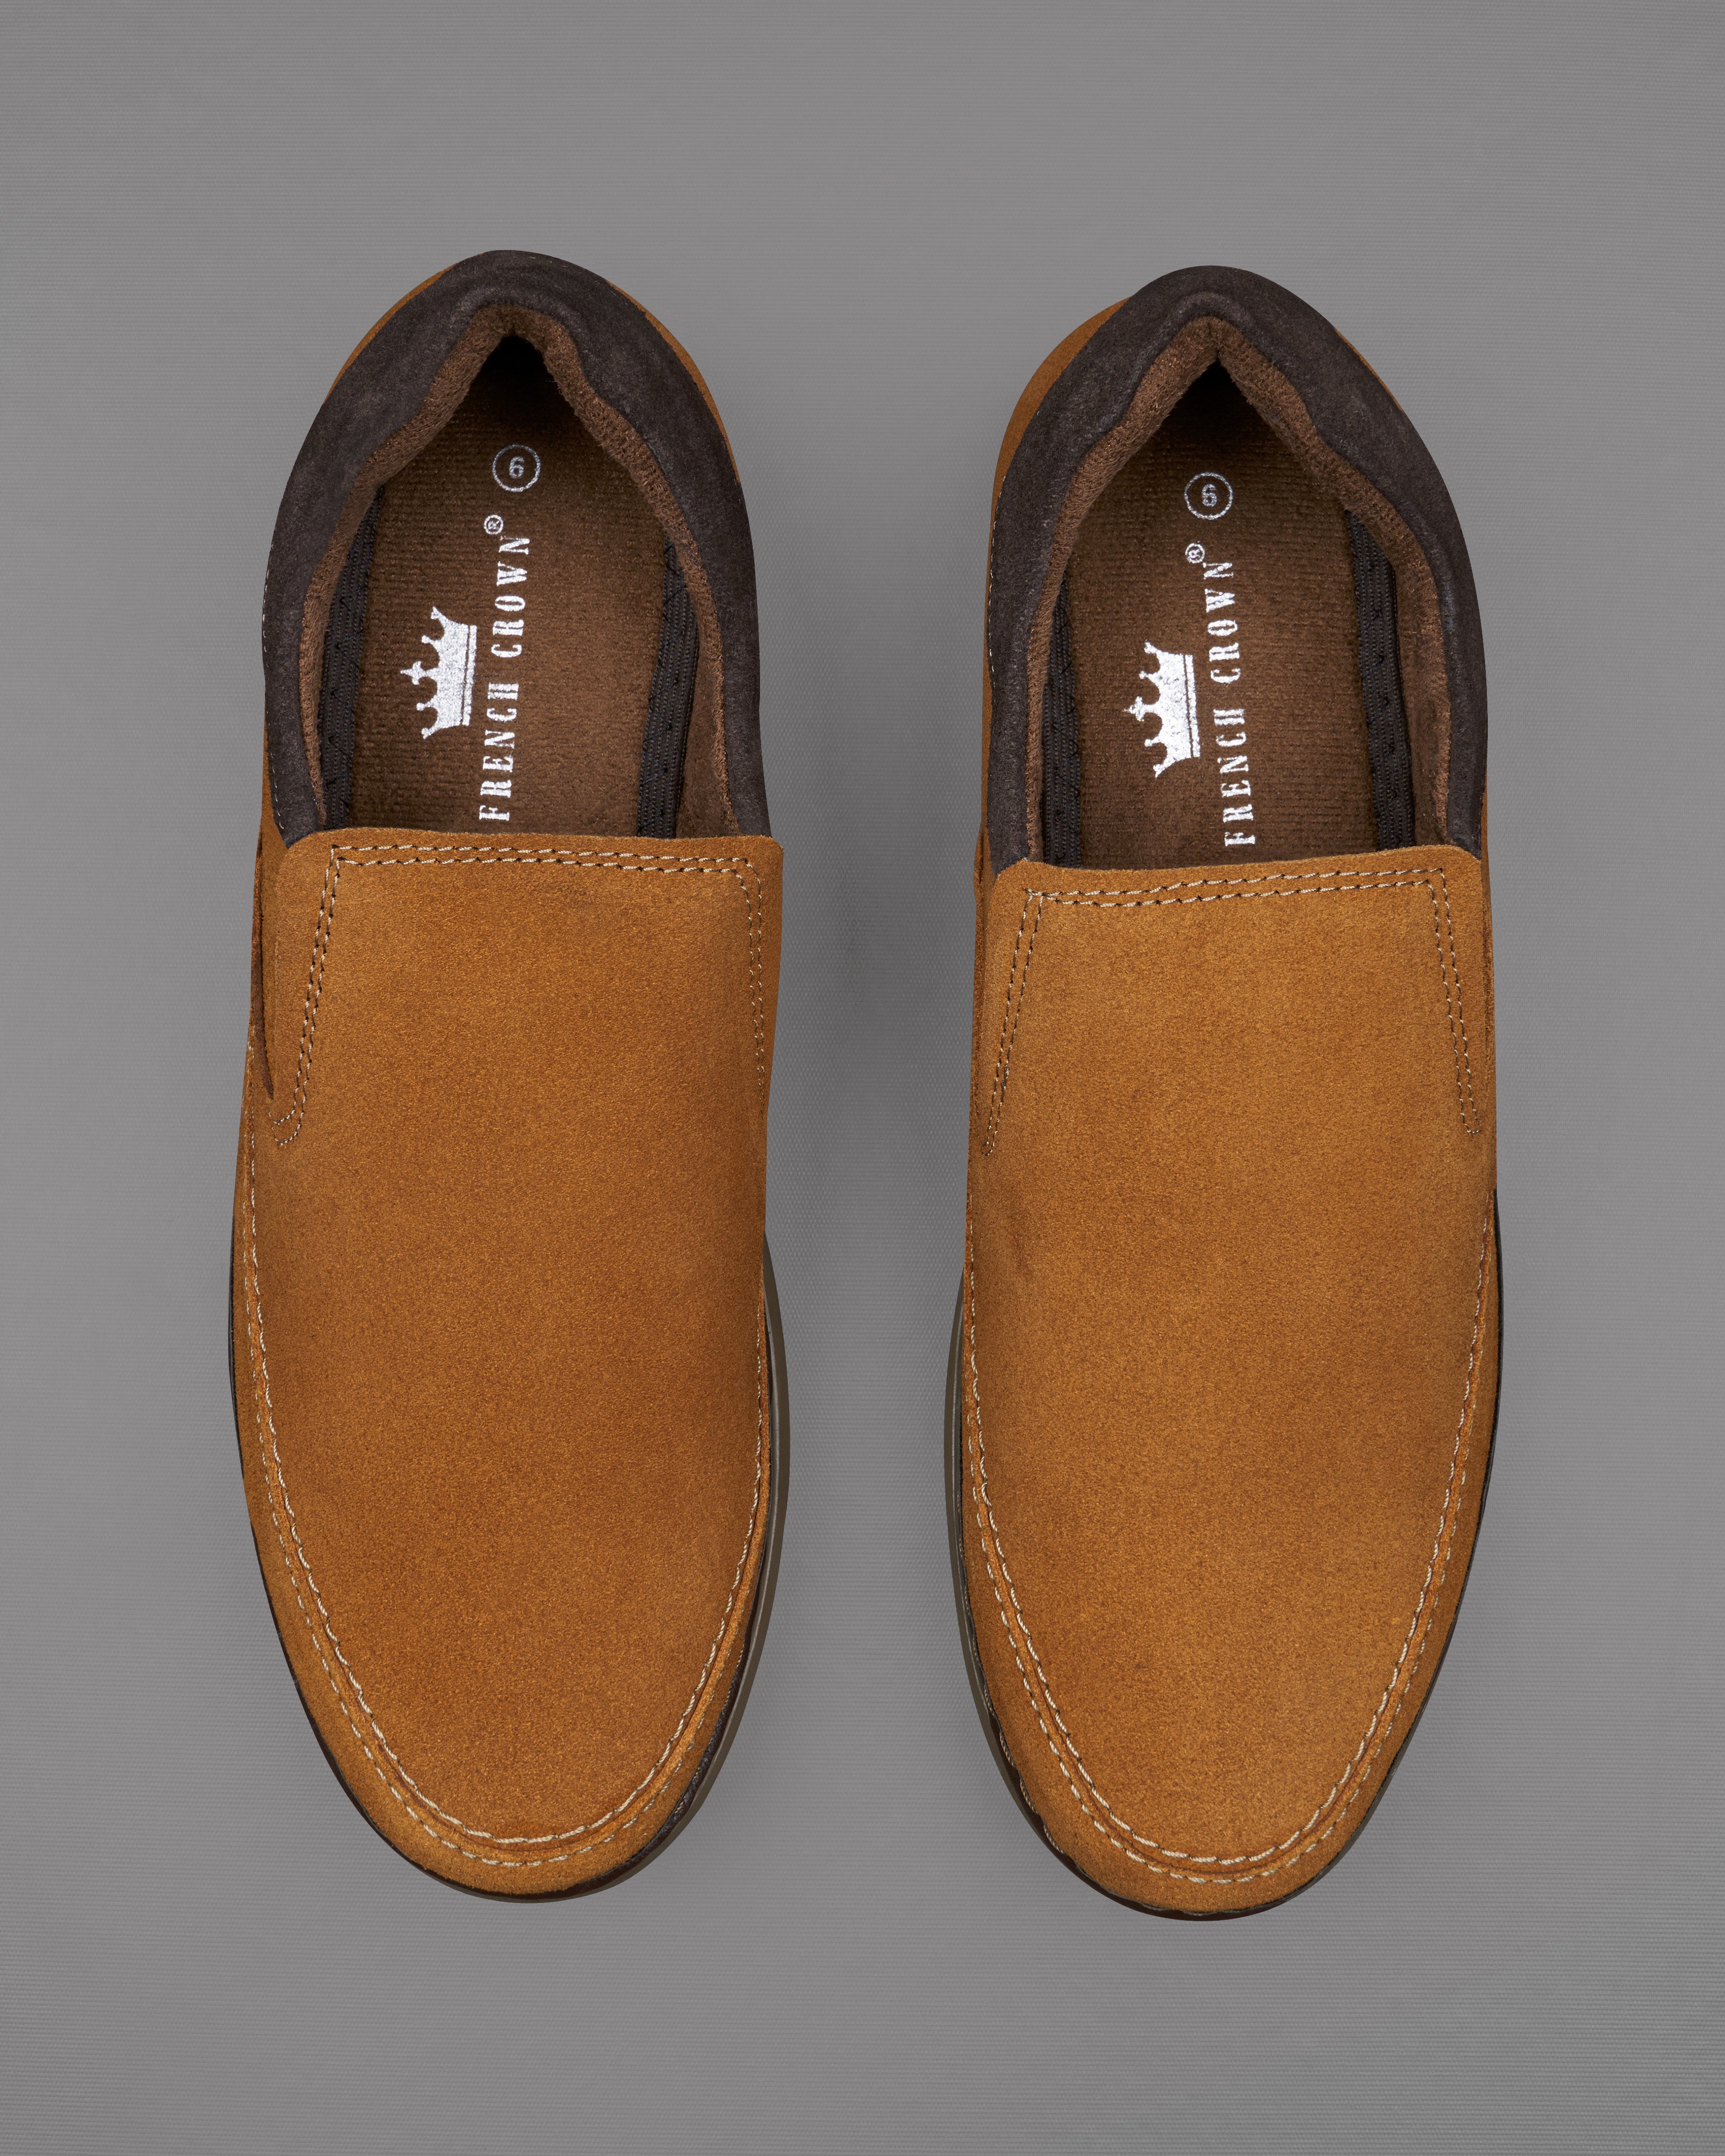 Brown Slip On Suede leather Shoes FT076-6, FT076-7, FT076-8, FT076-9, FT076-10, FT076-11